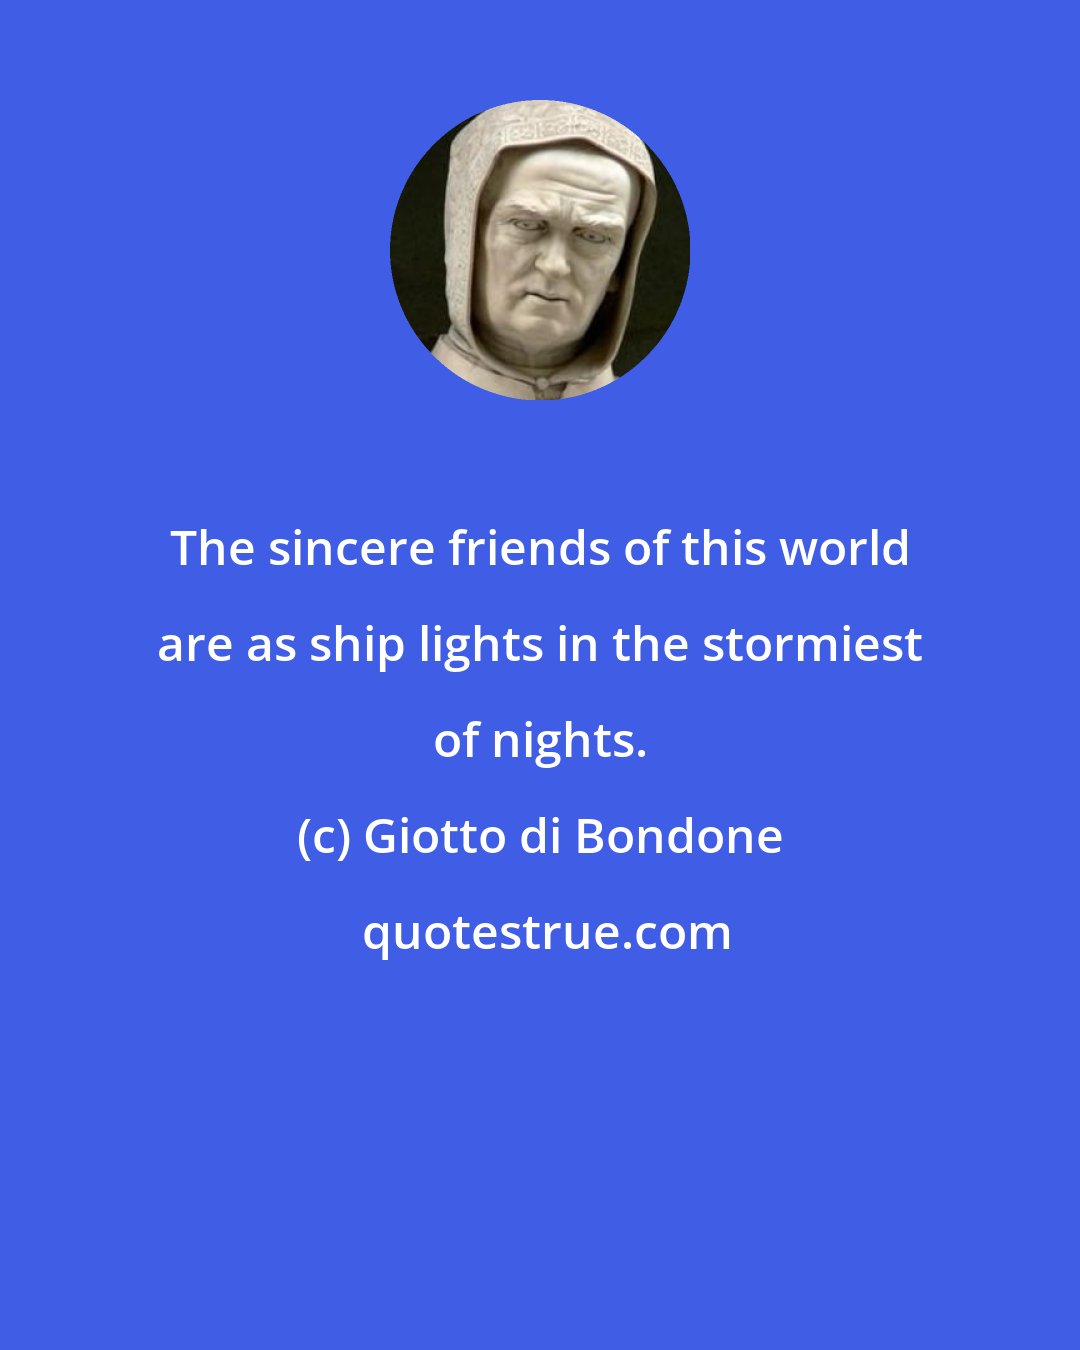 Giotto di Bondone: The sincere friends of this world are as ship lights in the stormiest of nights.